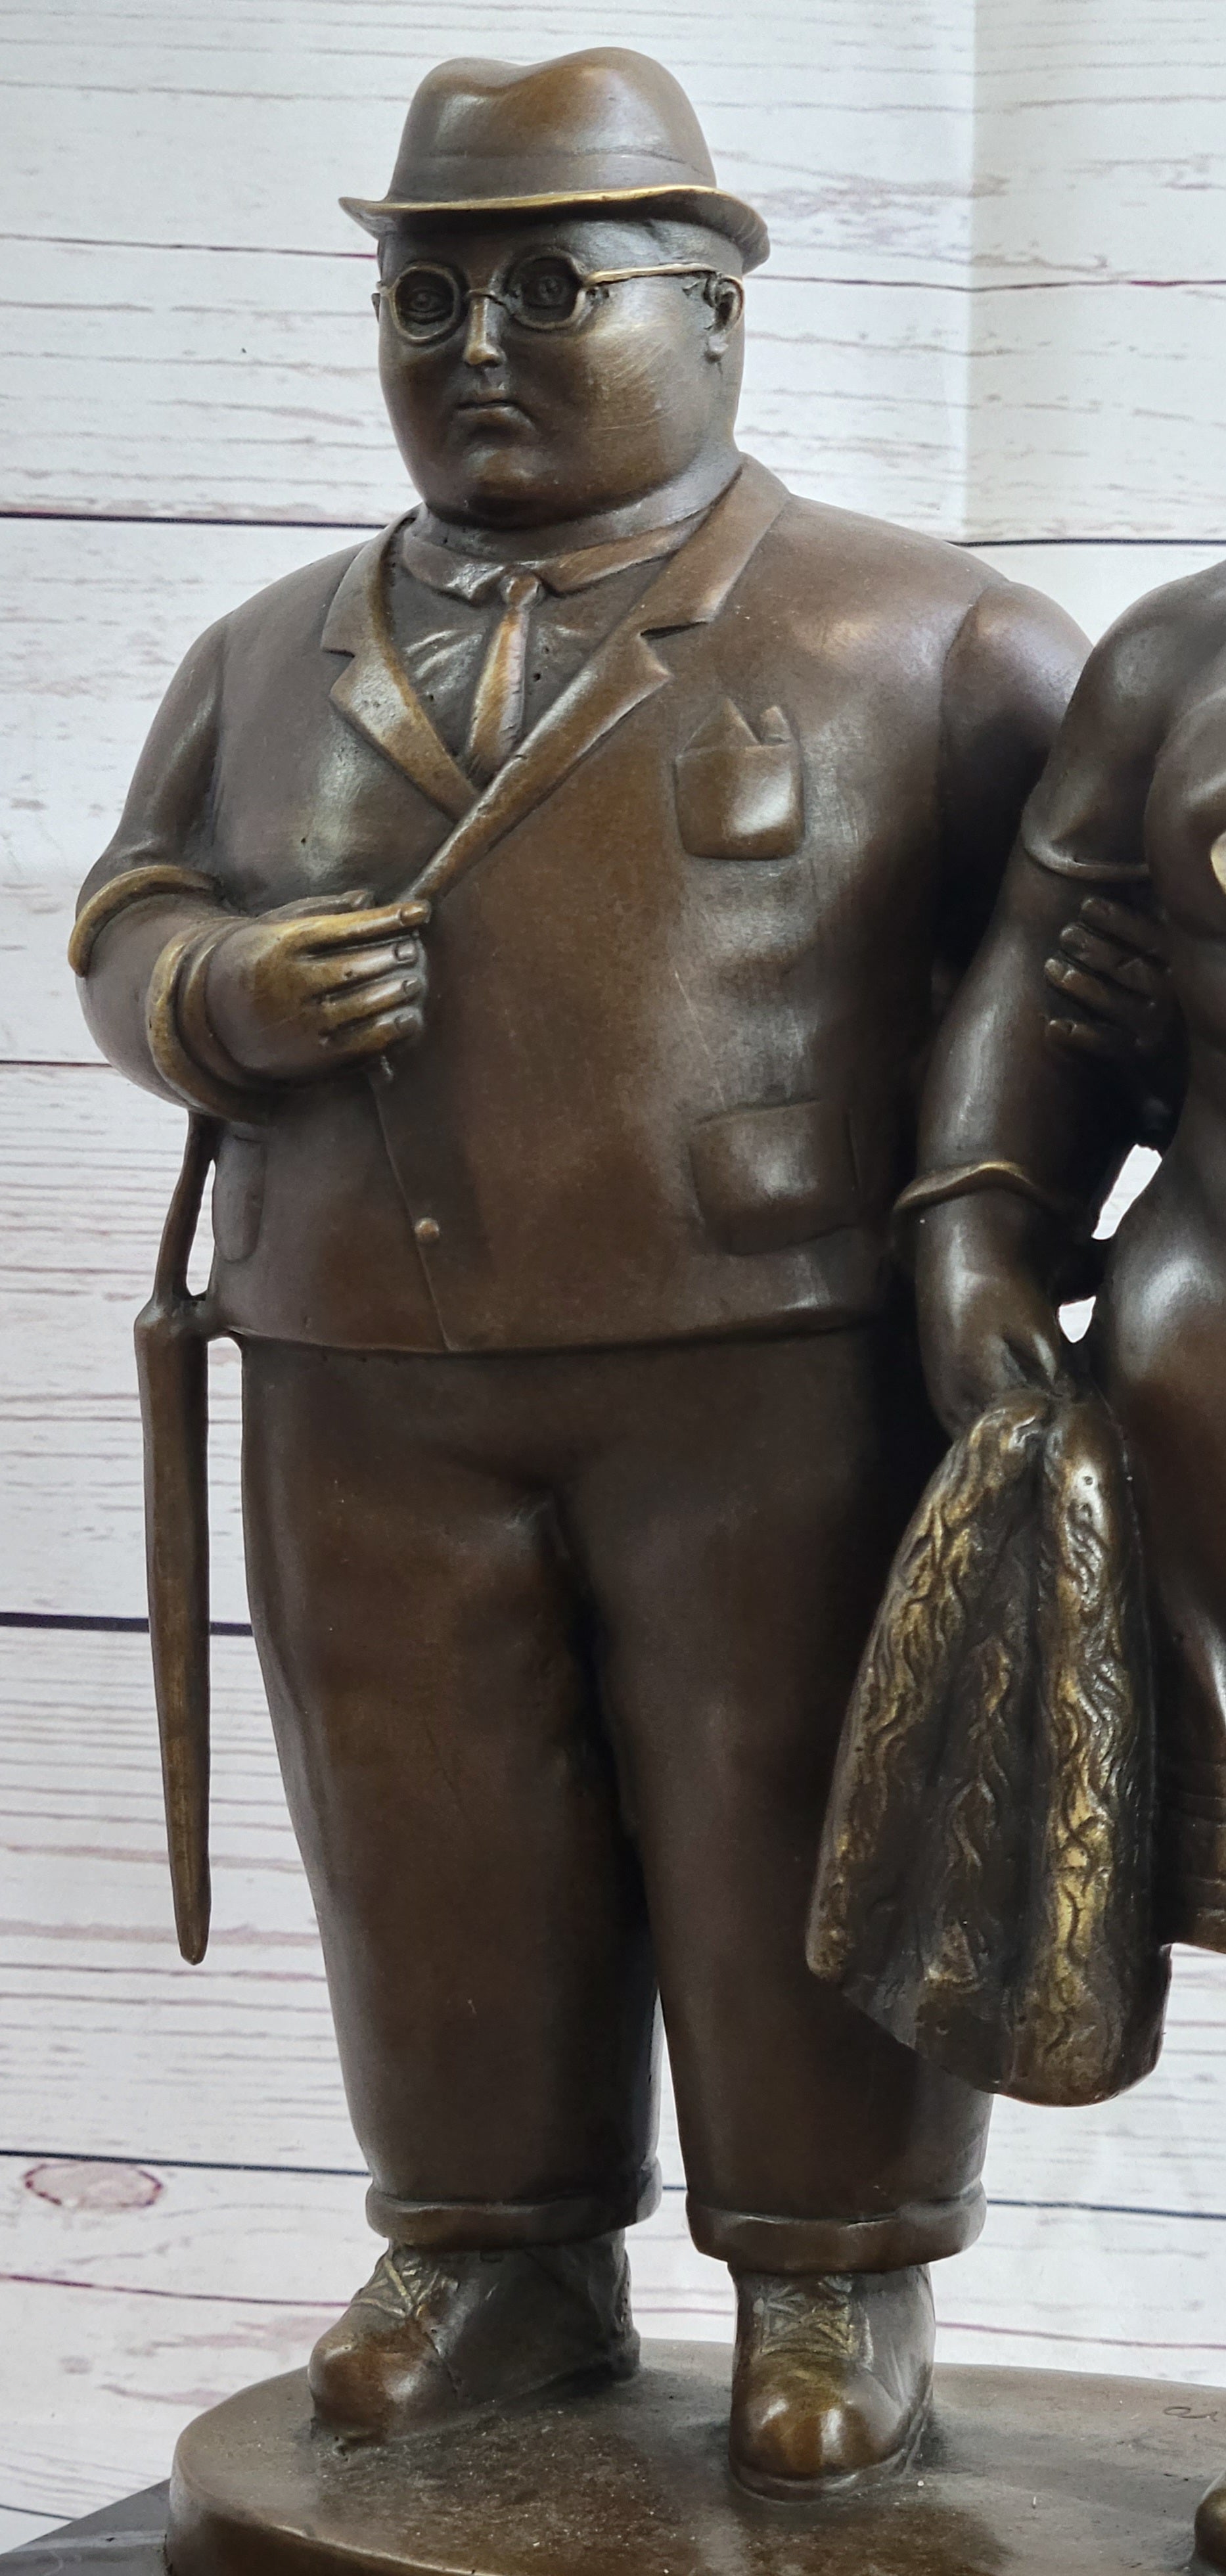 English Couple Bronze Sculpture Museum Quality Classic Artwork by Botero Figurine